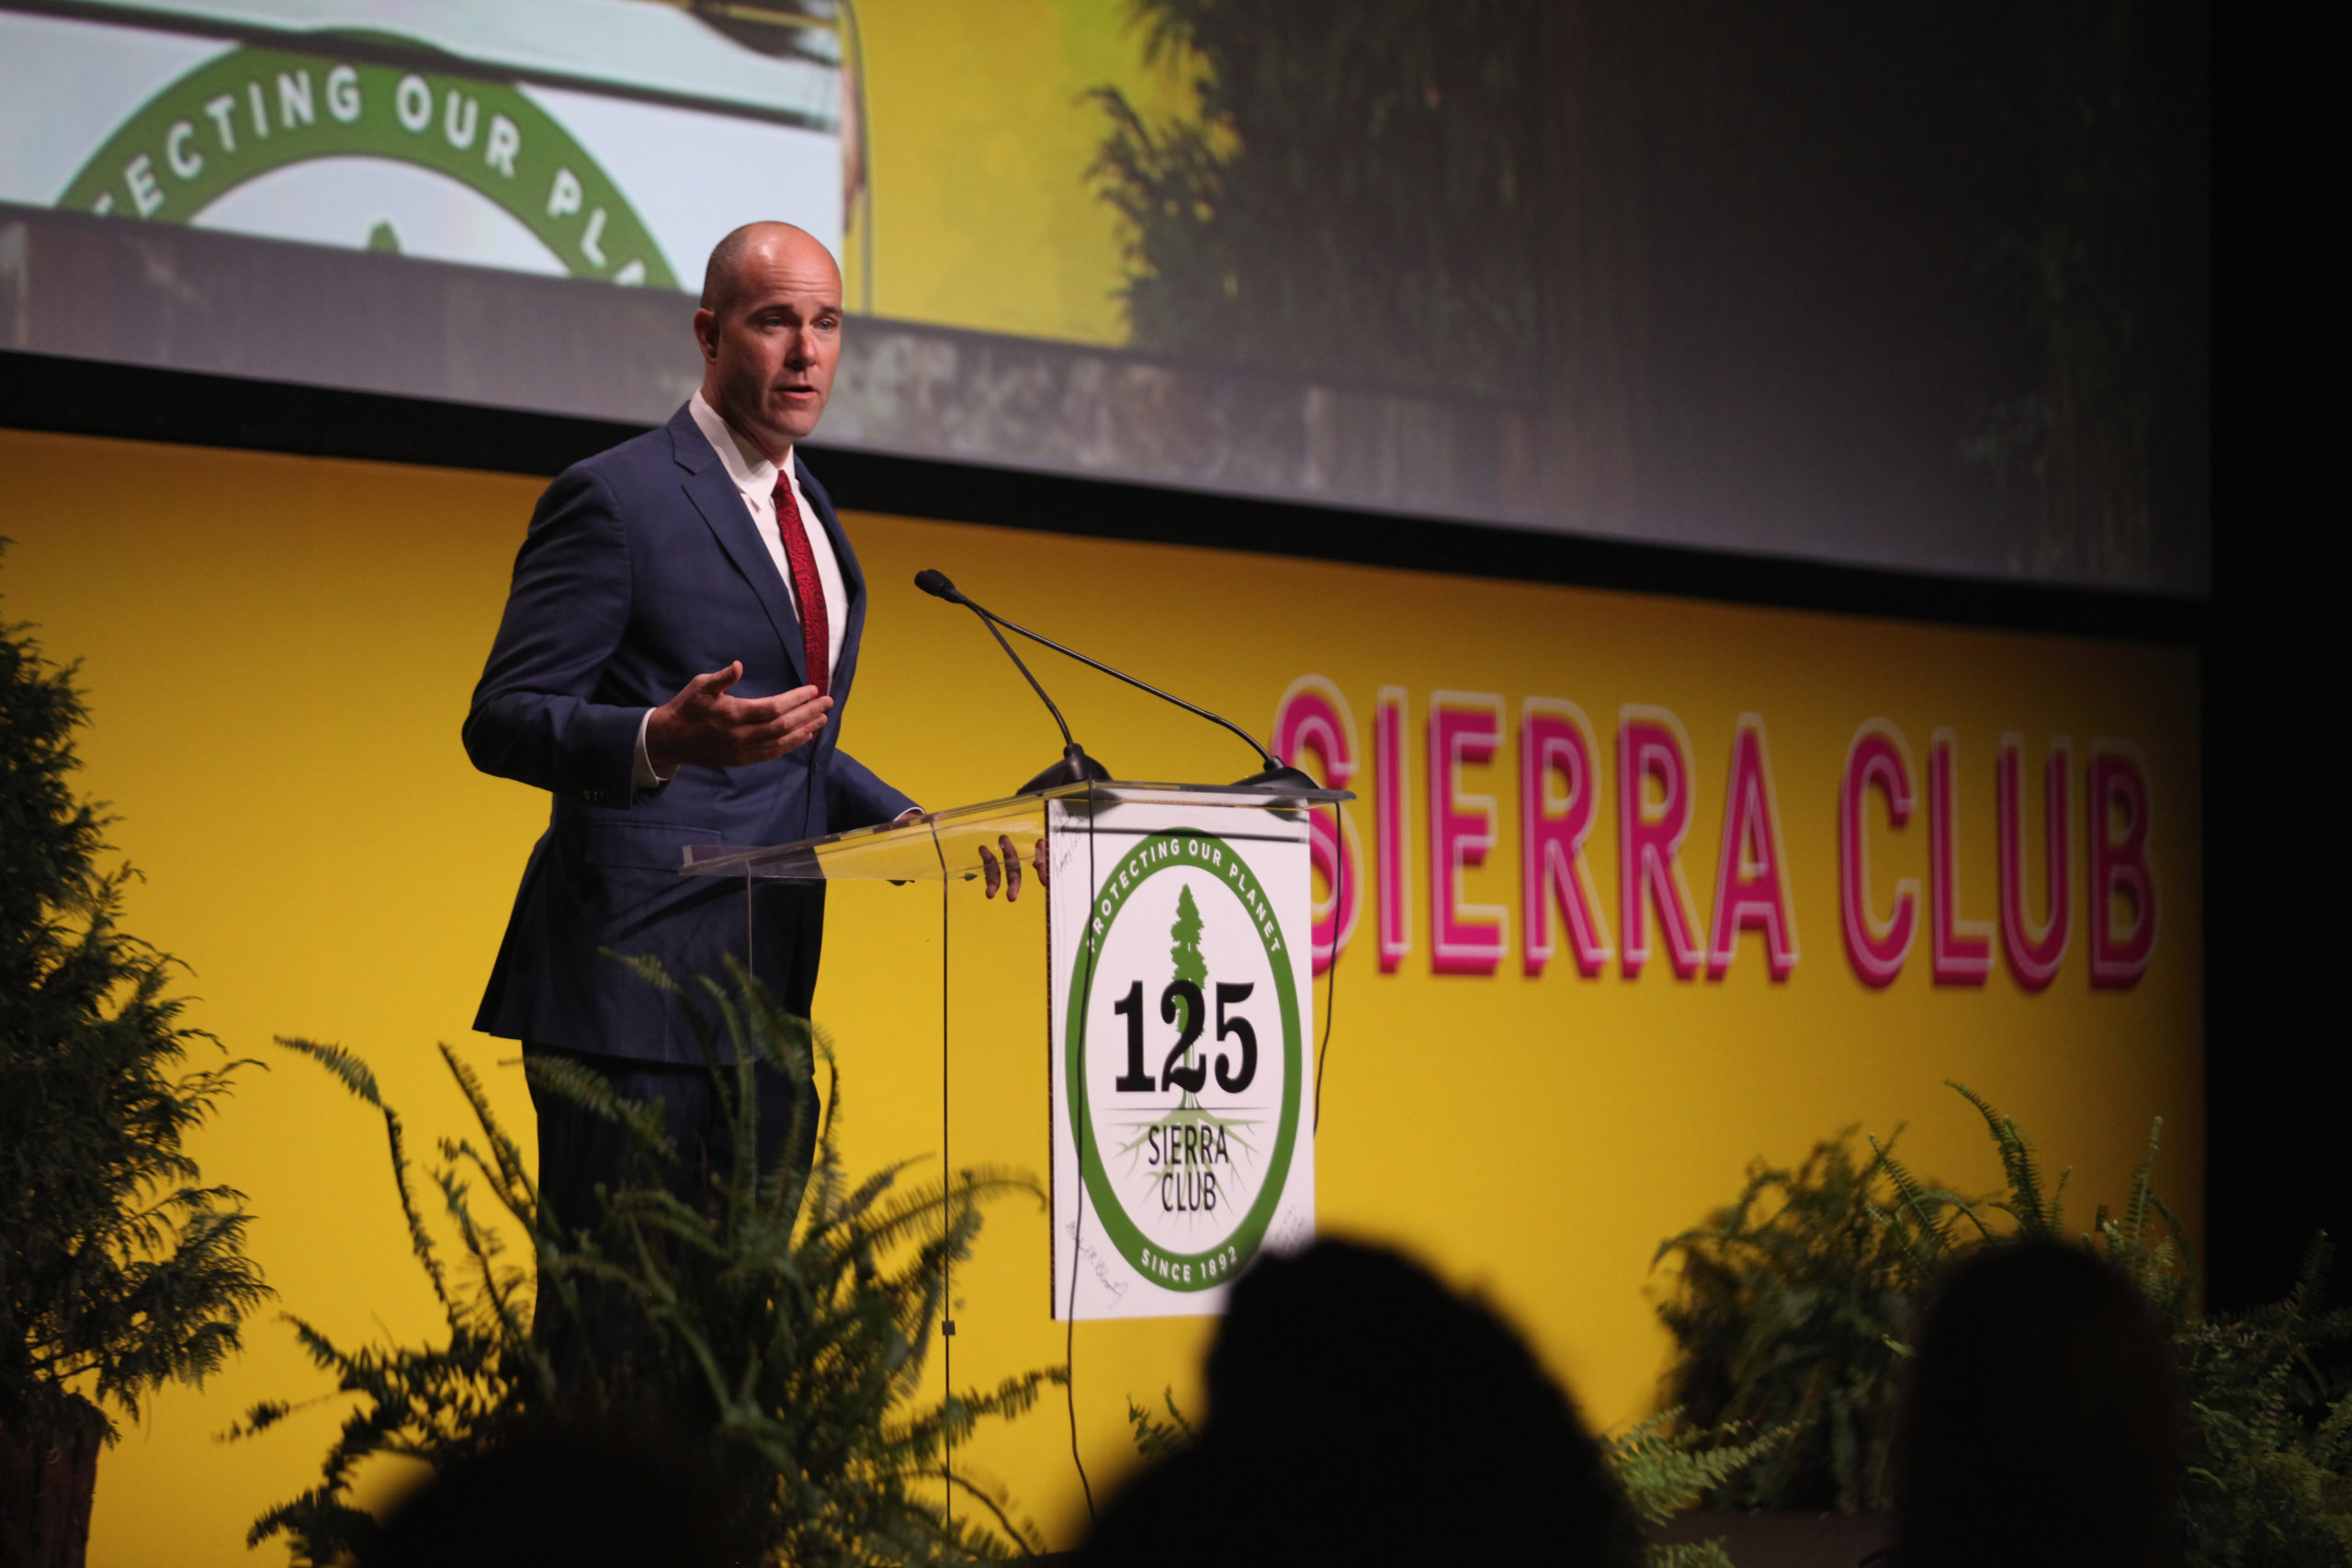 Sierra Club Executive Director Michael Brune speaks onstage during the groups 125th anniversary Trail Blazer's Ball on May 18, 2017 in San Francisco, California. (Kelly Sullivan/Getty Images for Sierra Club)